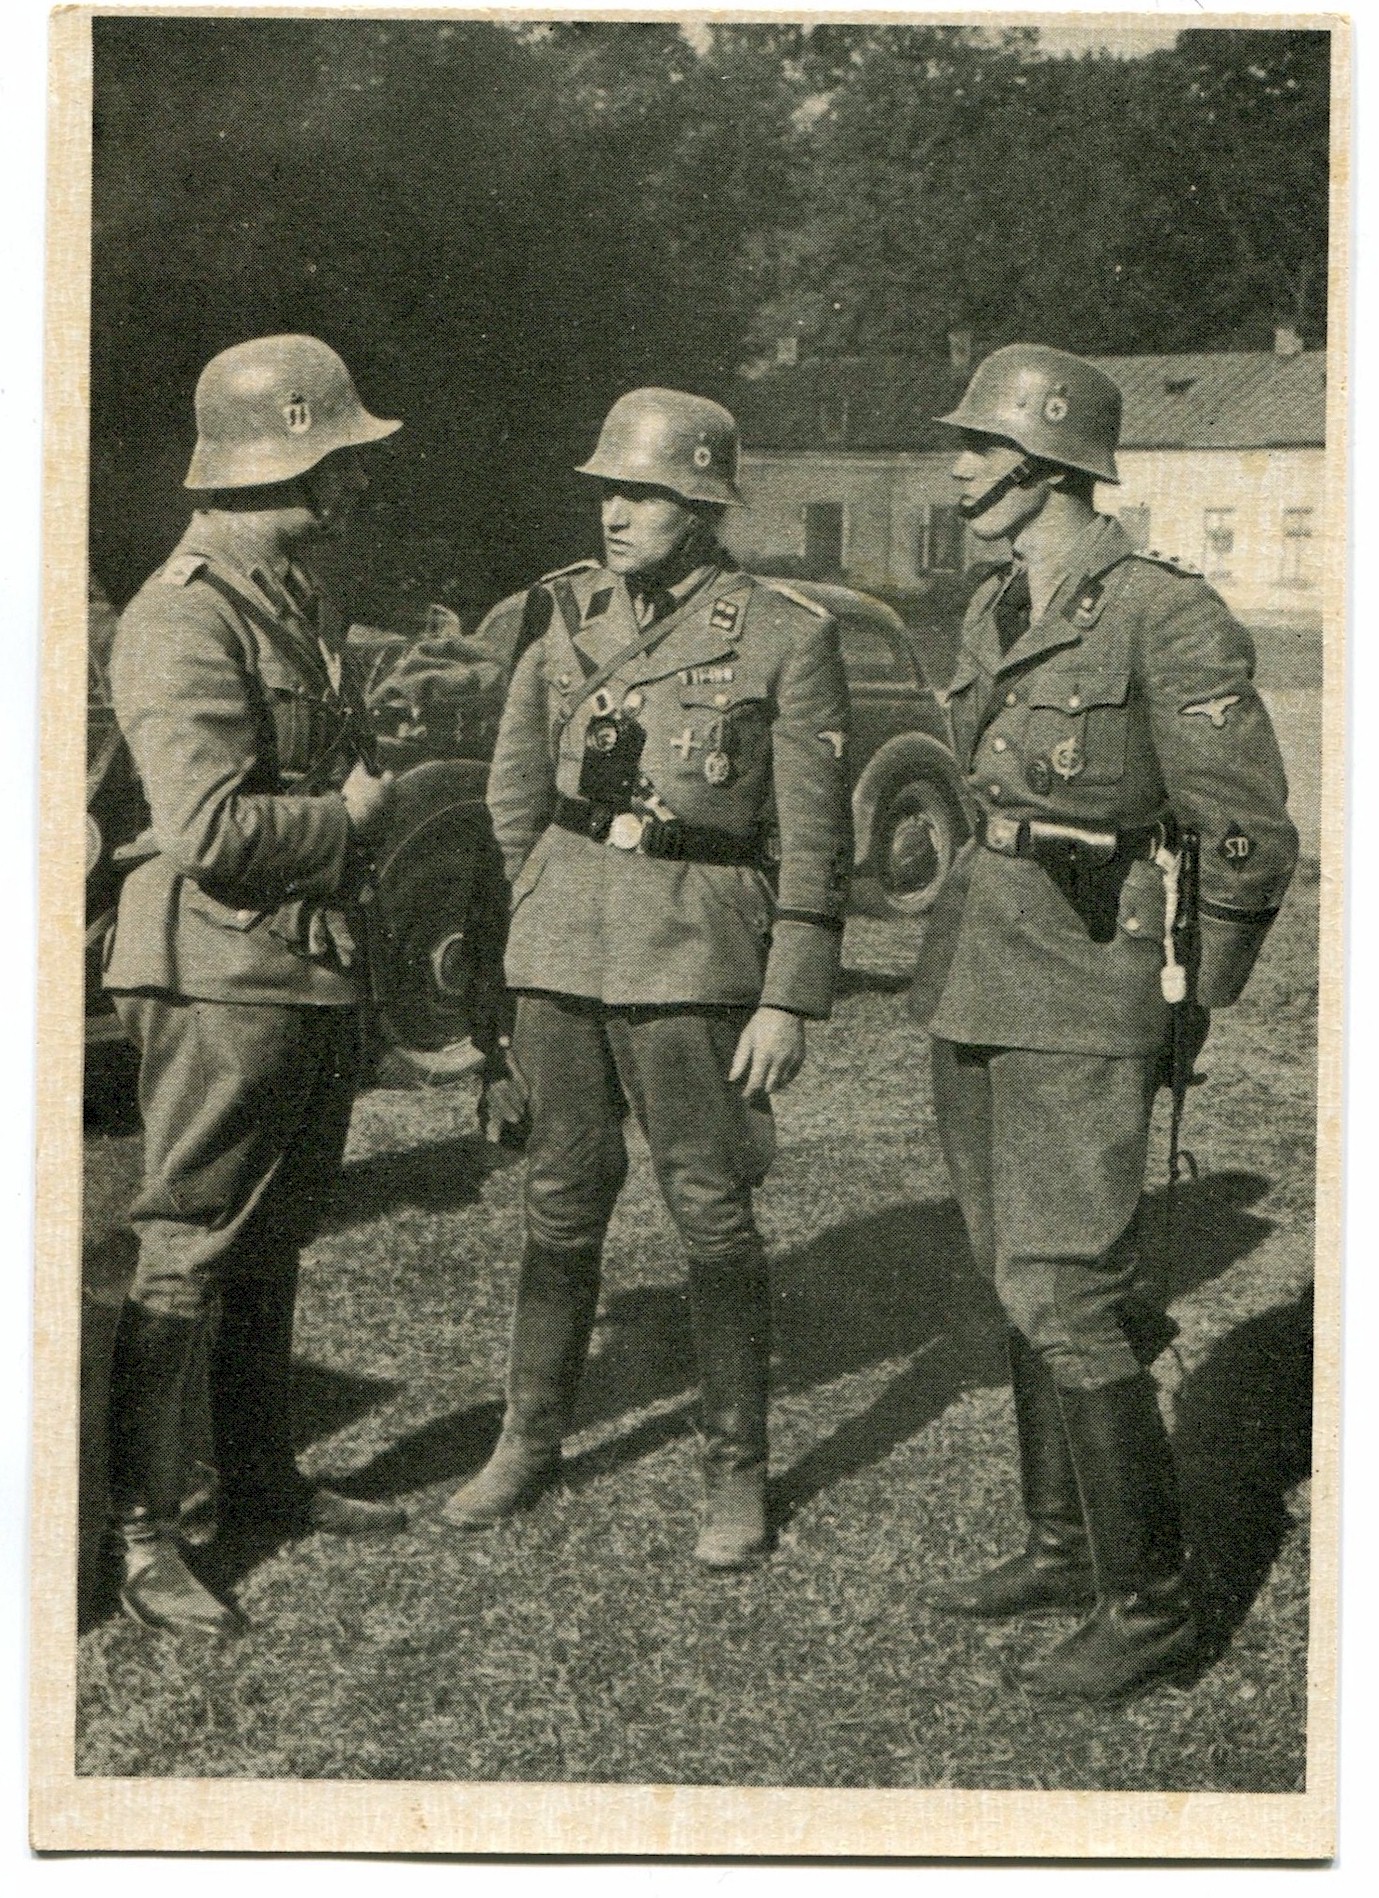 SS POST CARD POLICE IN POLAND"A SECURITY POLICE GROUP BEFORE AN ACTION"